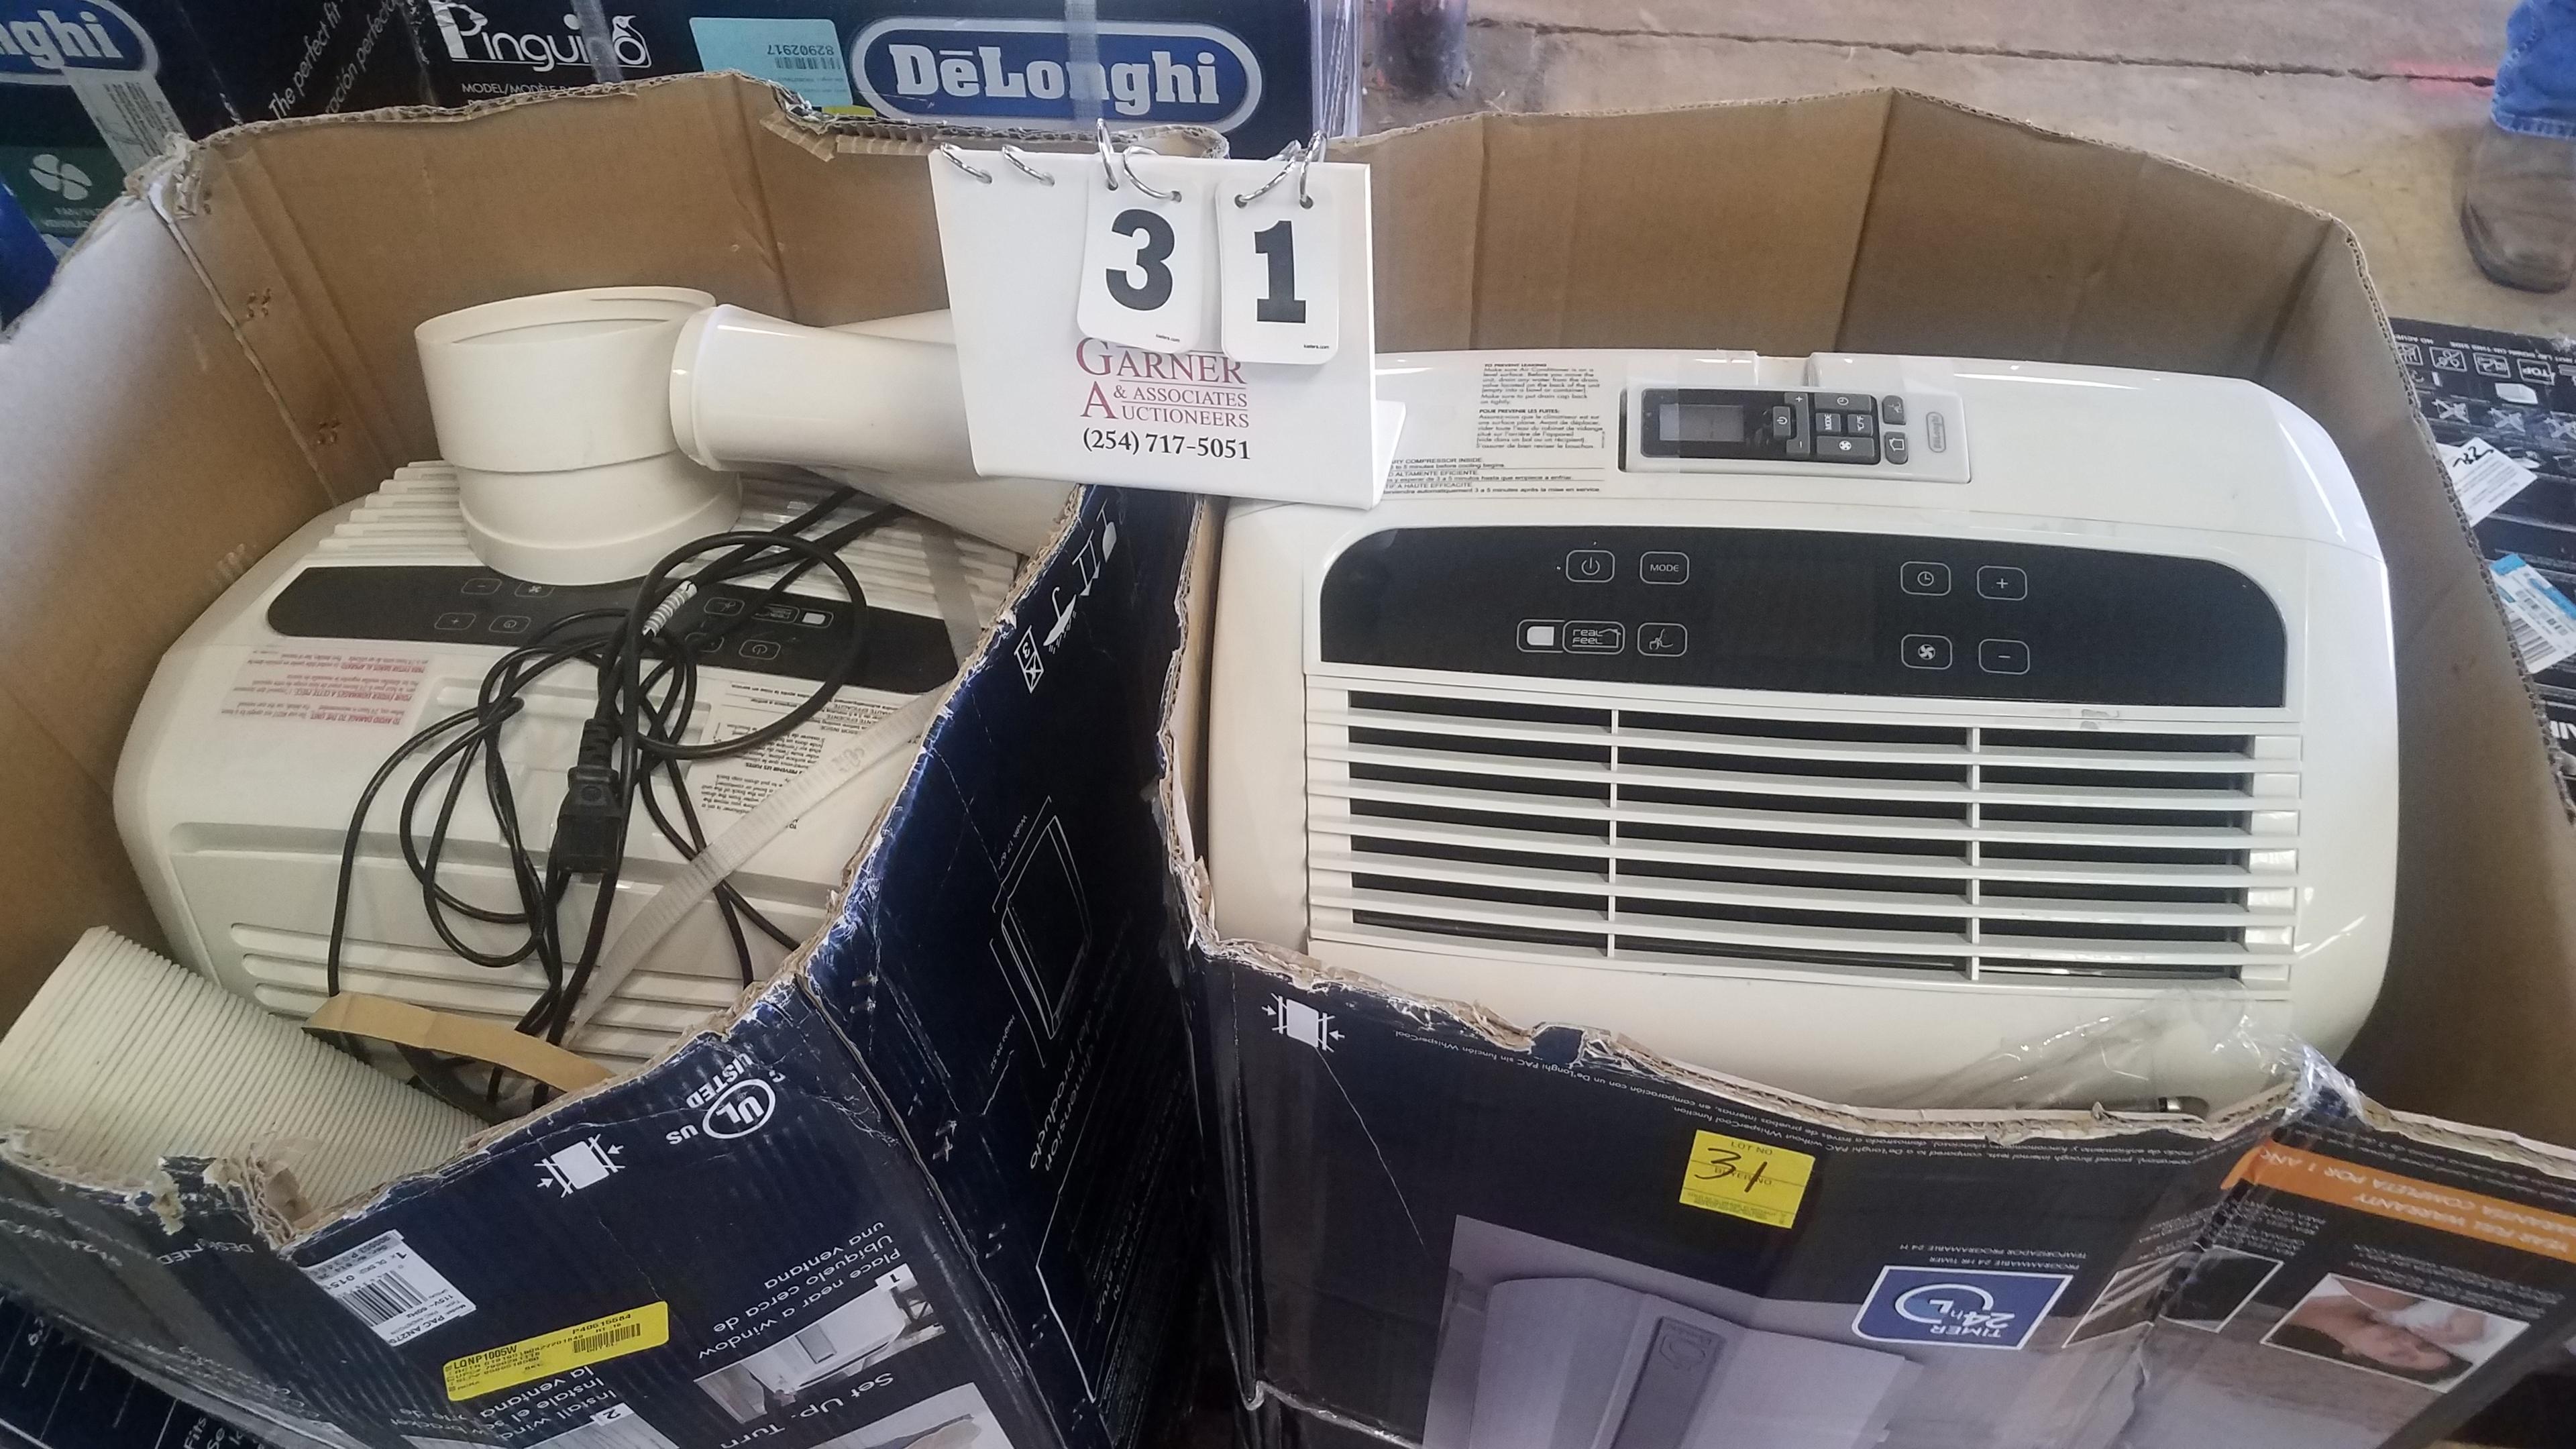 2 Delonghi Pinguino Portable Air Conditioner Up To 500 Sq. Ft. Room